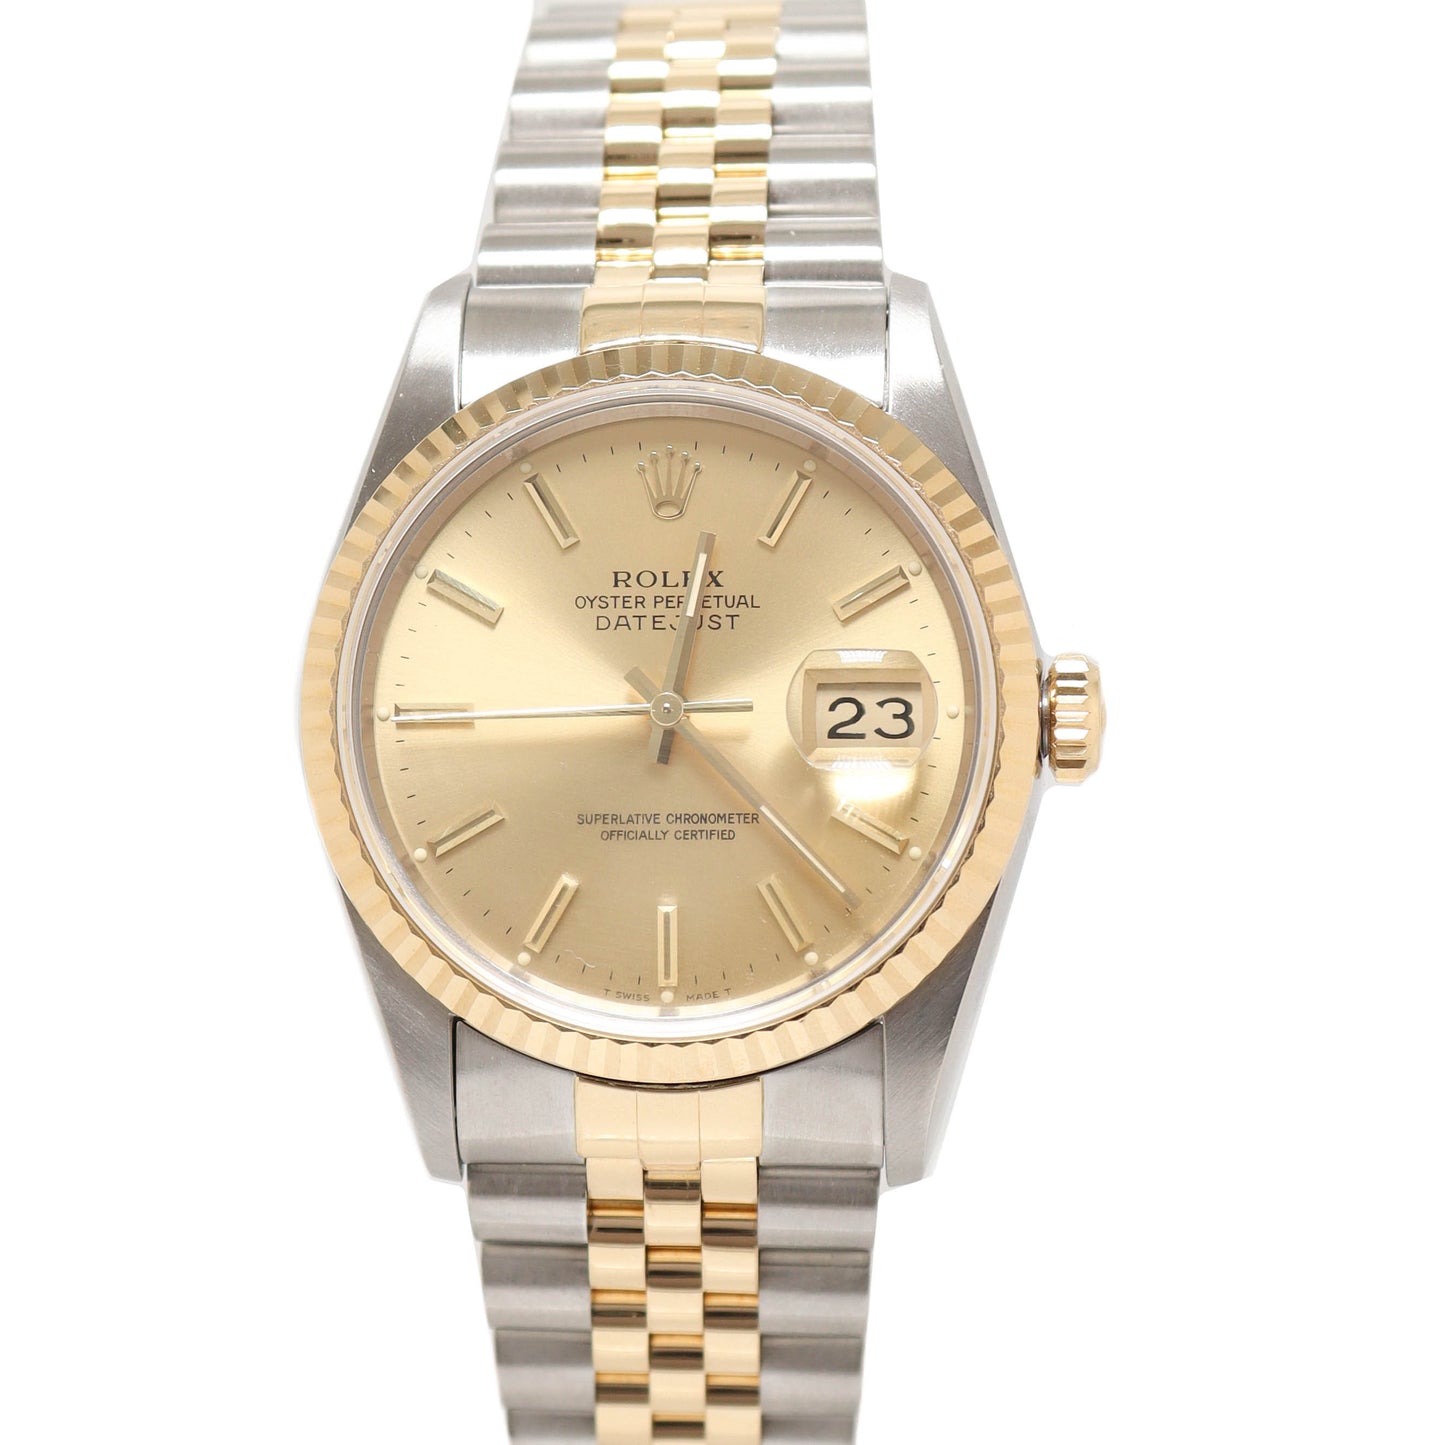 Rolex Datejust Two Tone Yellow Gold & Steel 36mm Champagne Stick Dial Watch  Reference # 16233